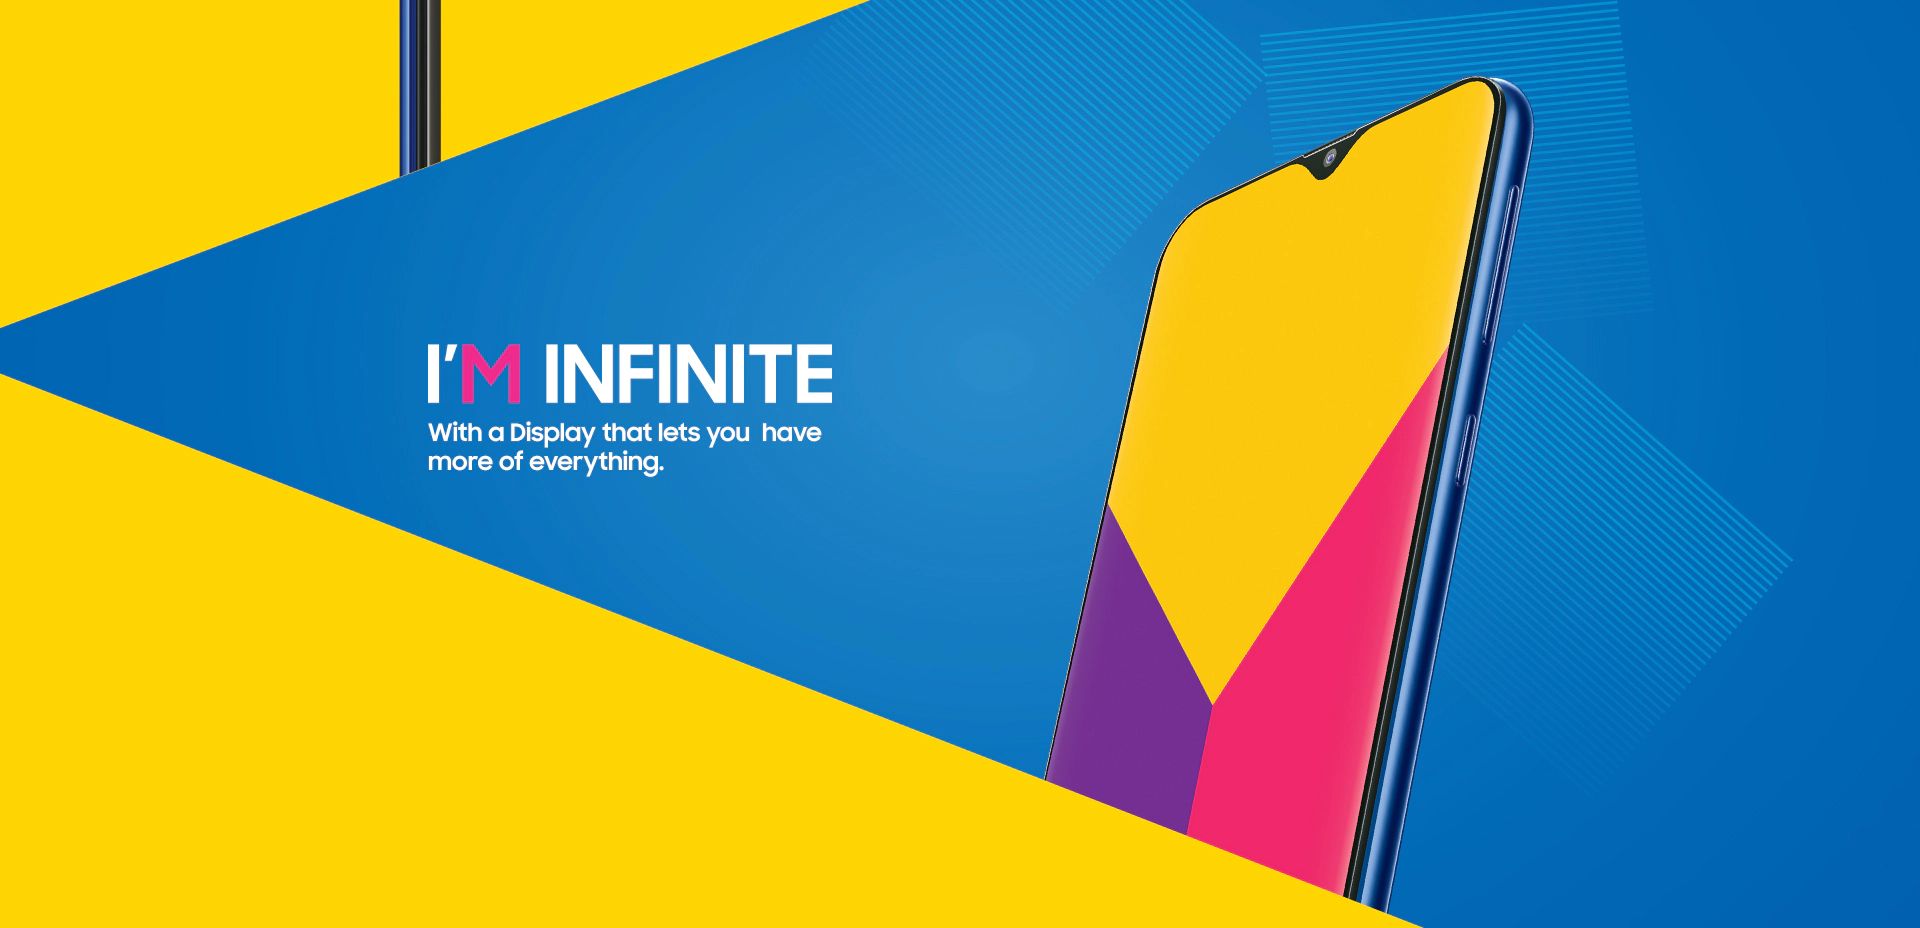 Samsung Galaxy M series officially revealed later this month